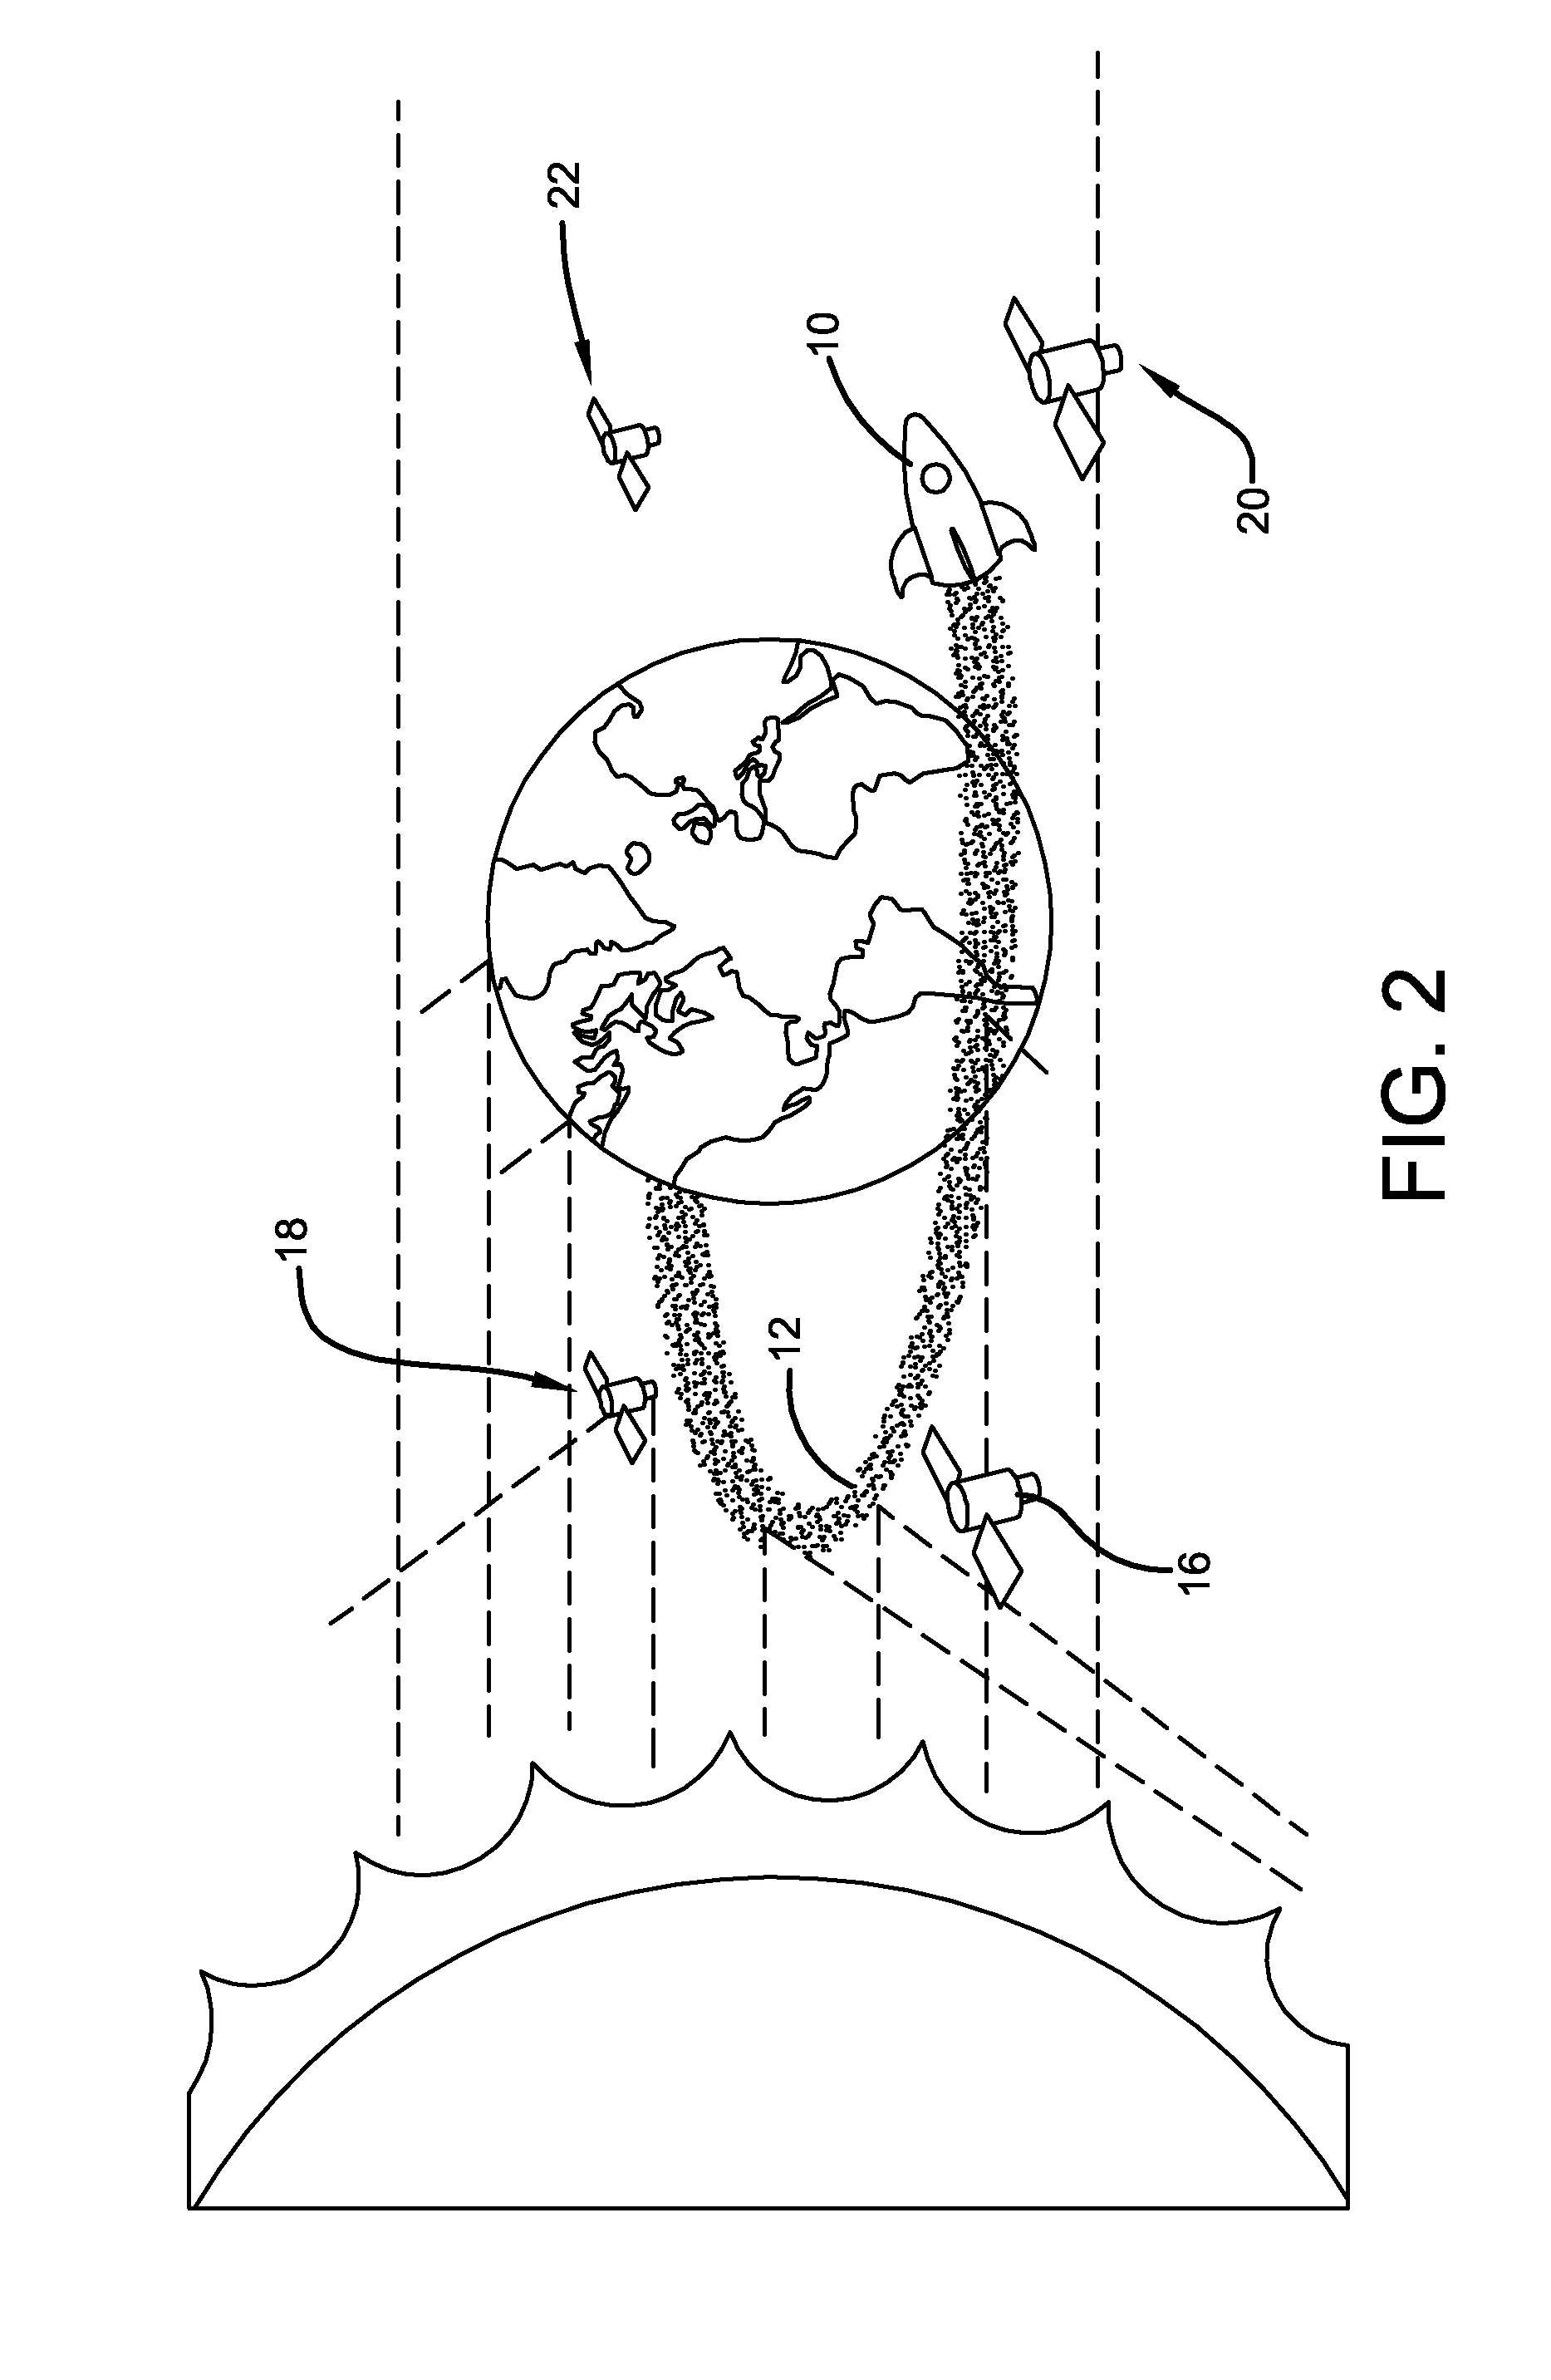 Method for modifying environmental conditions with ring comprised of magnetic material